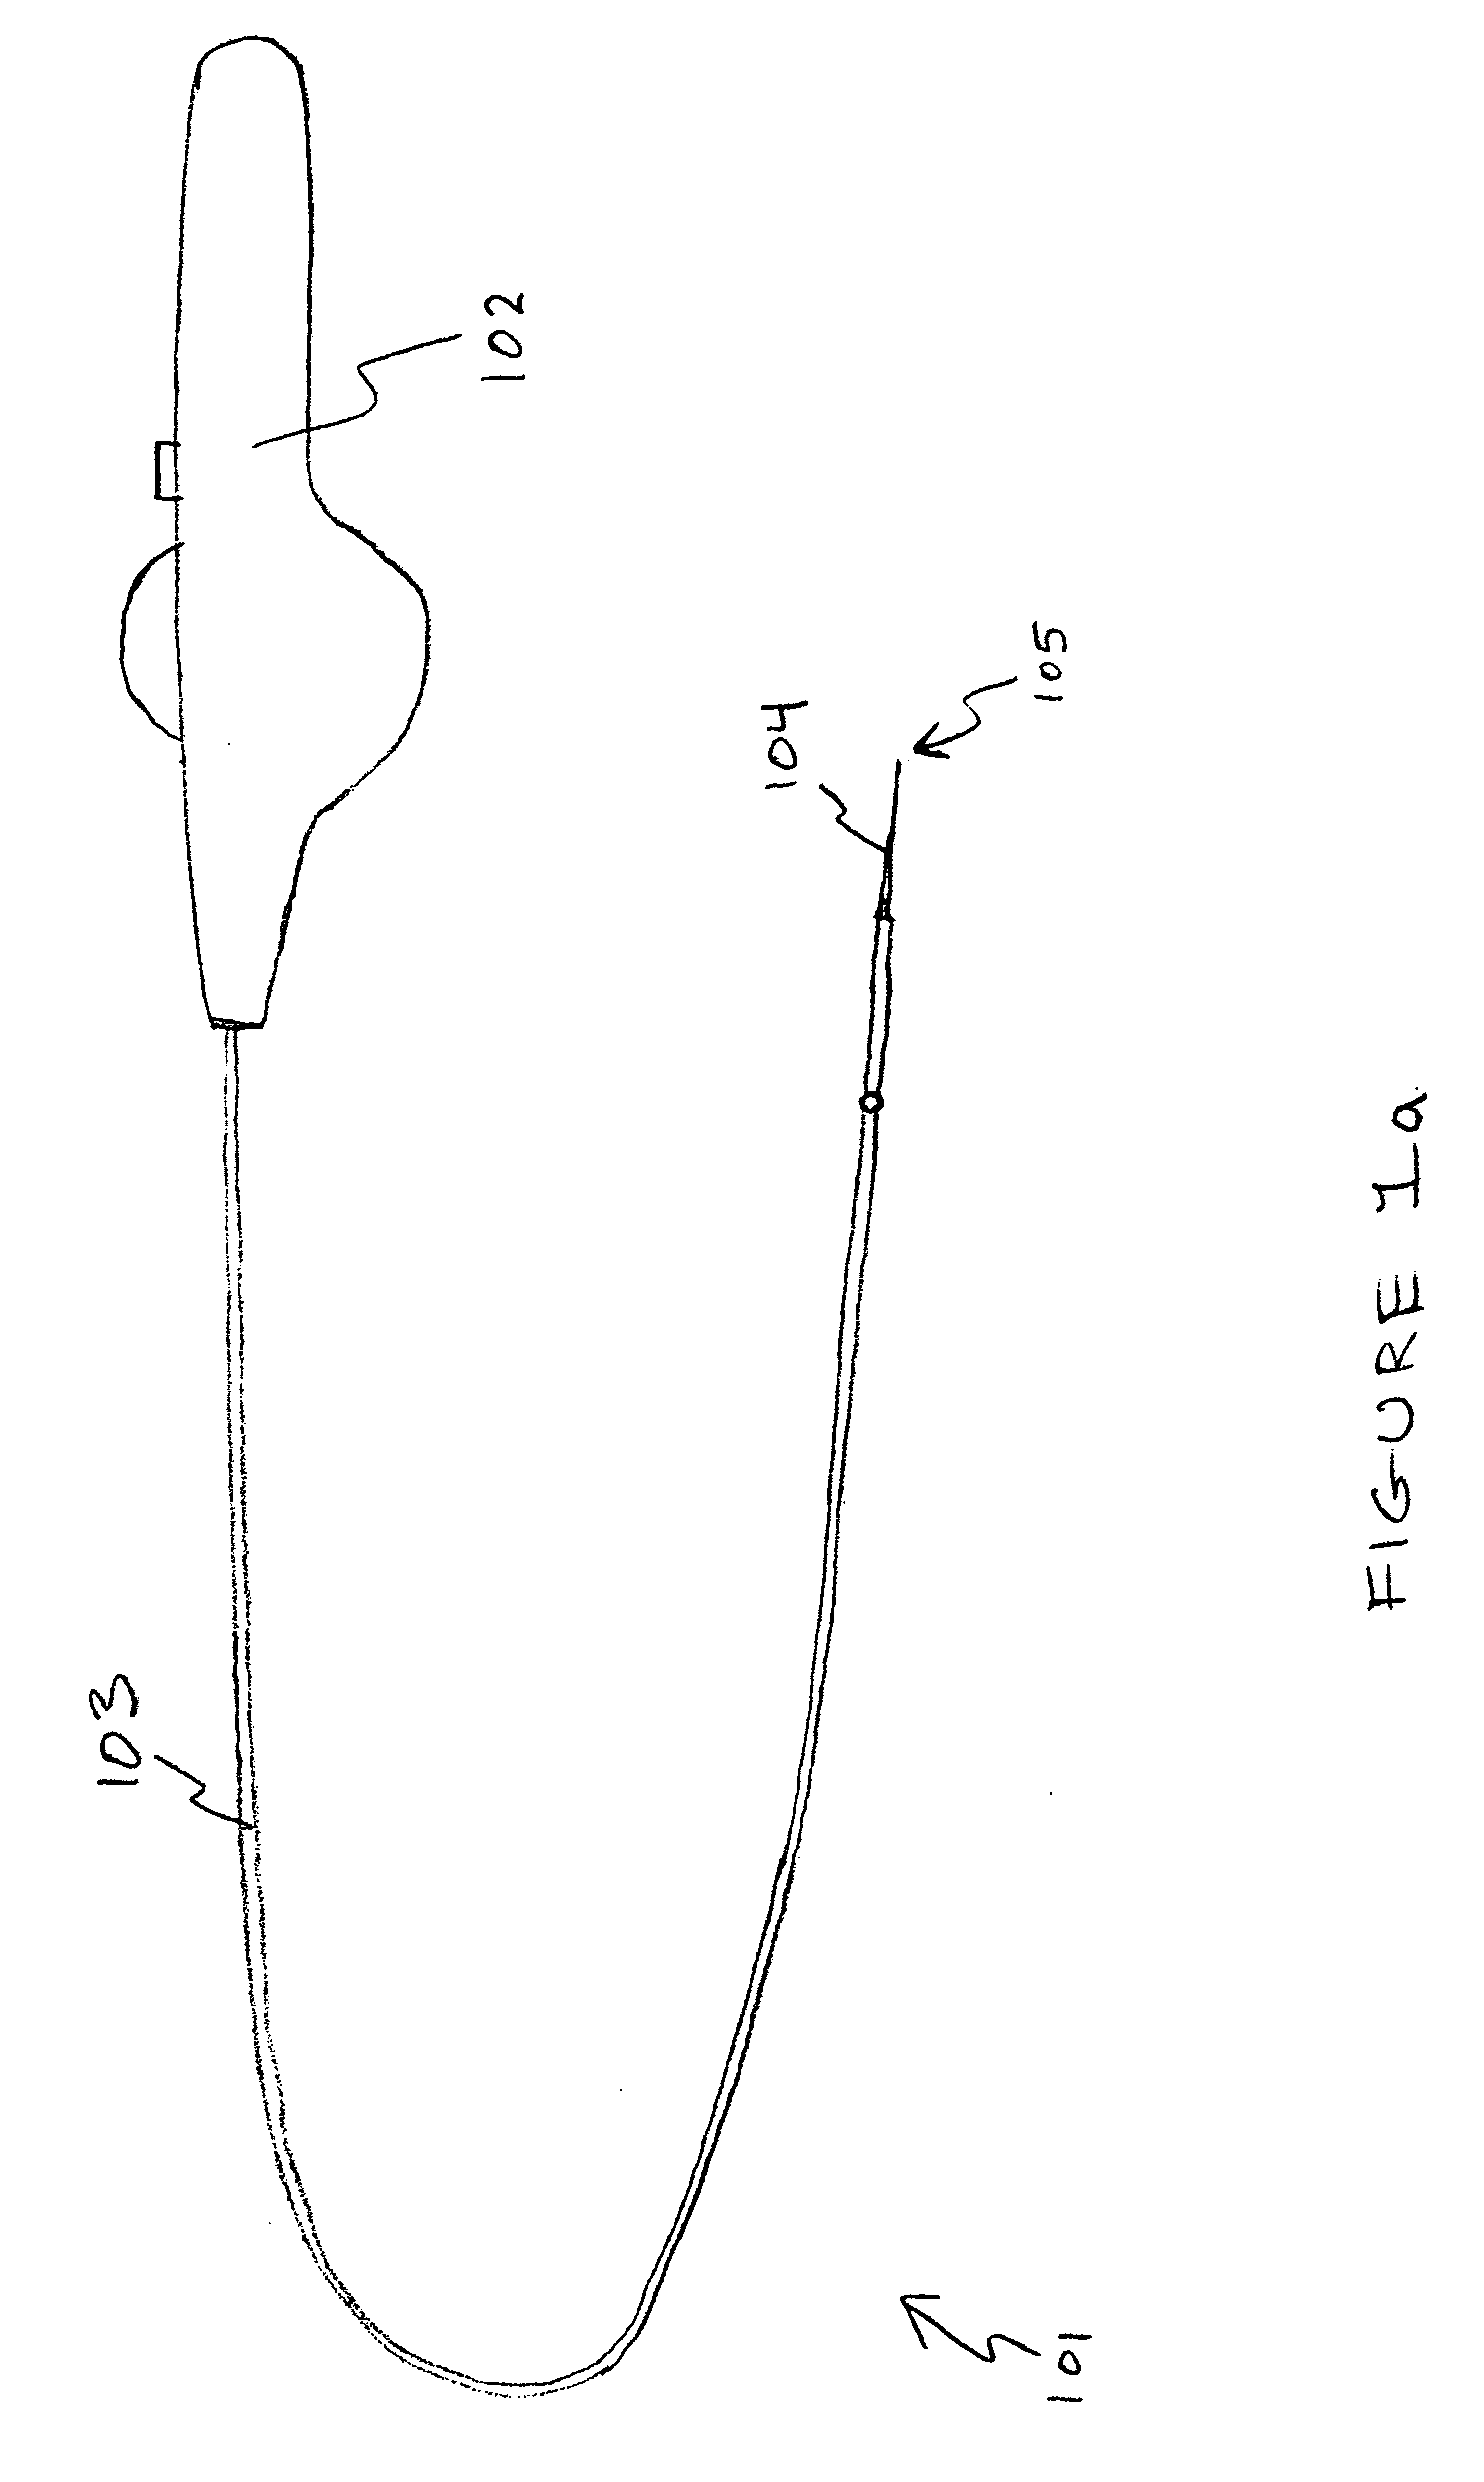 Minimally invasive surgical stabilization devices and methods